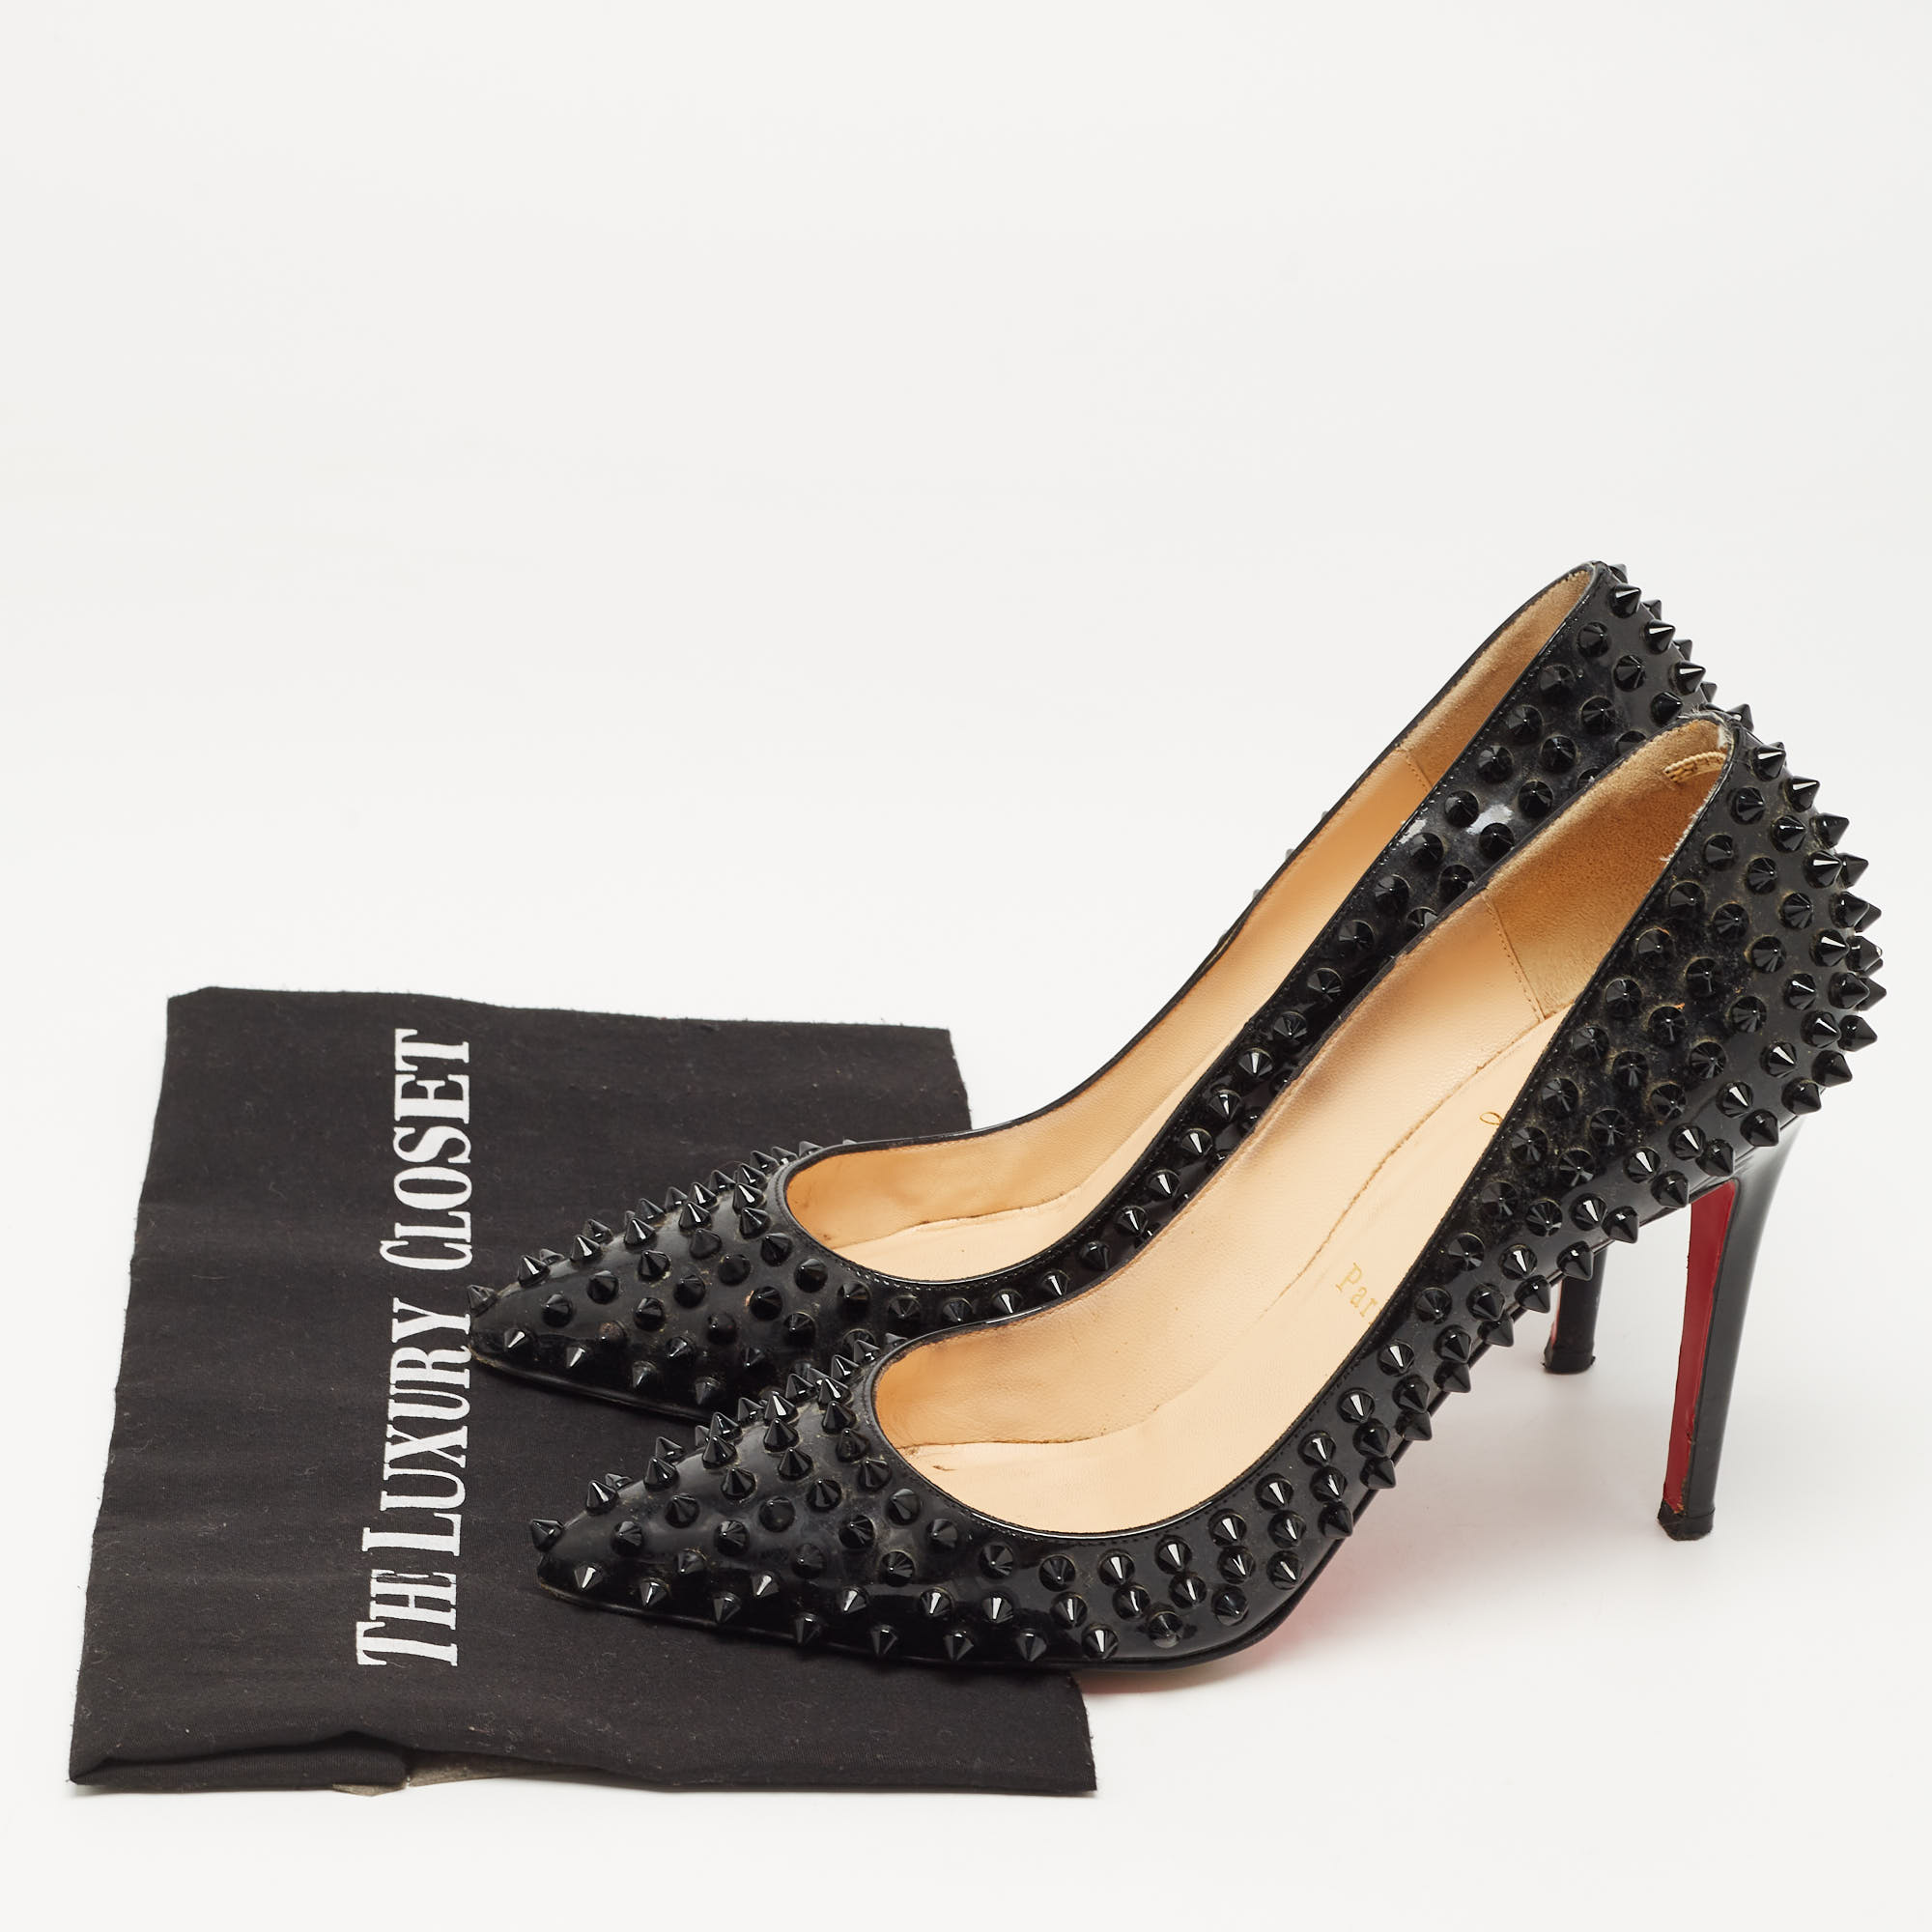 Christian Louboutin Black Patent Leather Pigalle Spikes Pumps Size 39.5